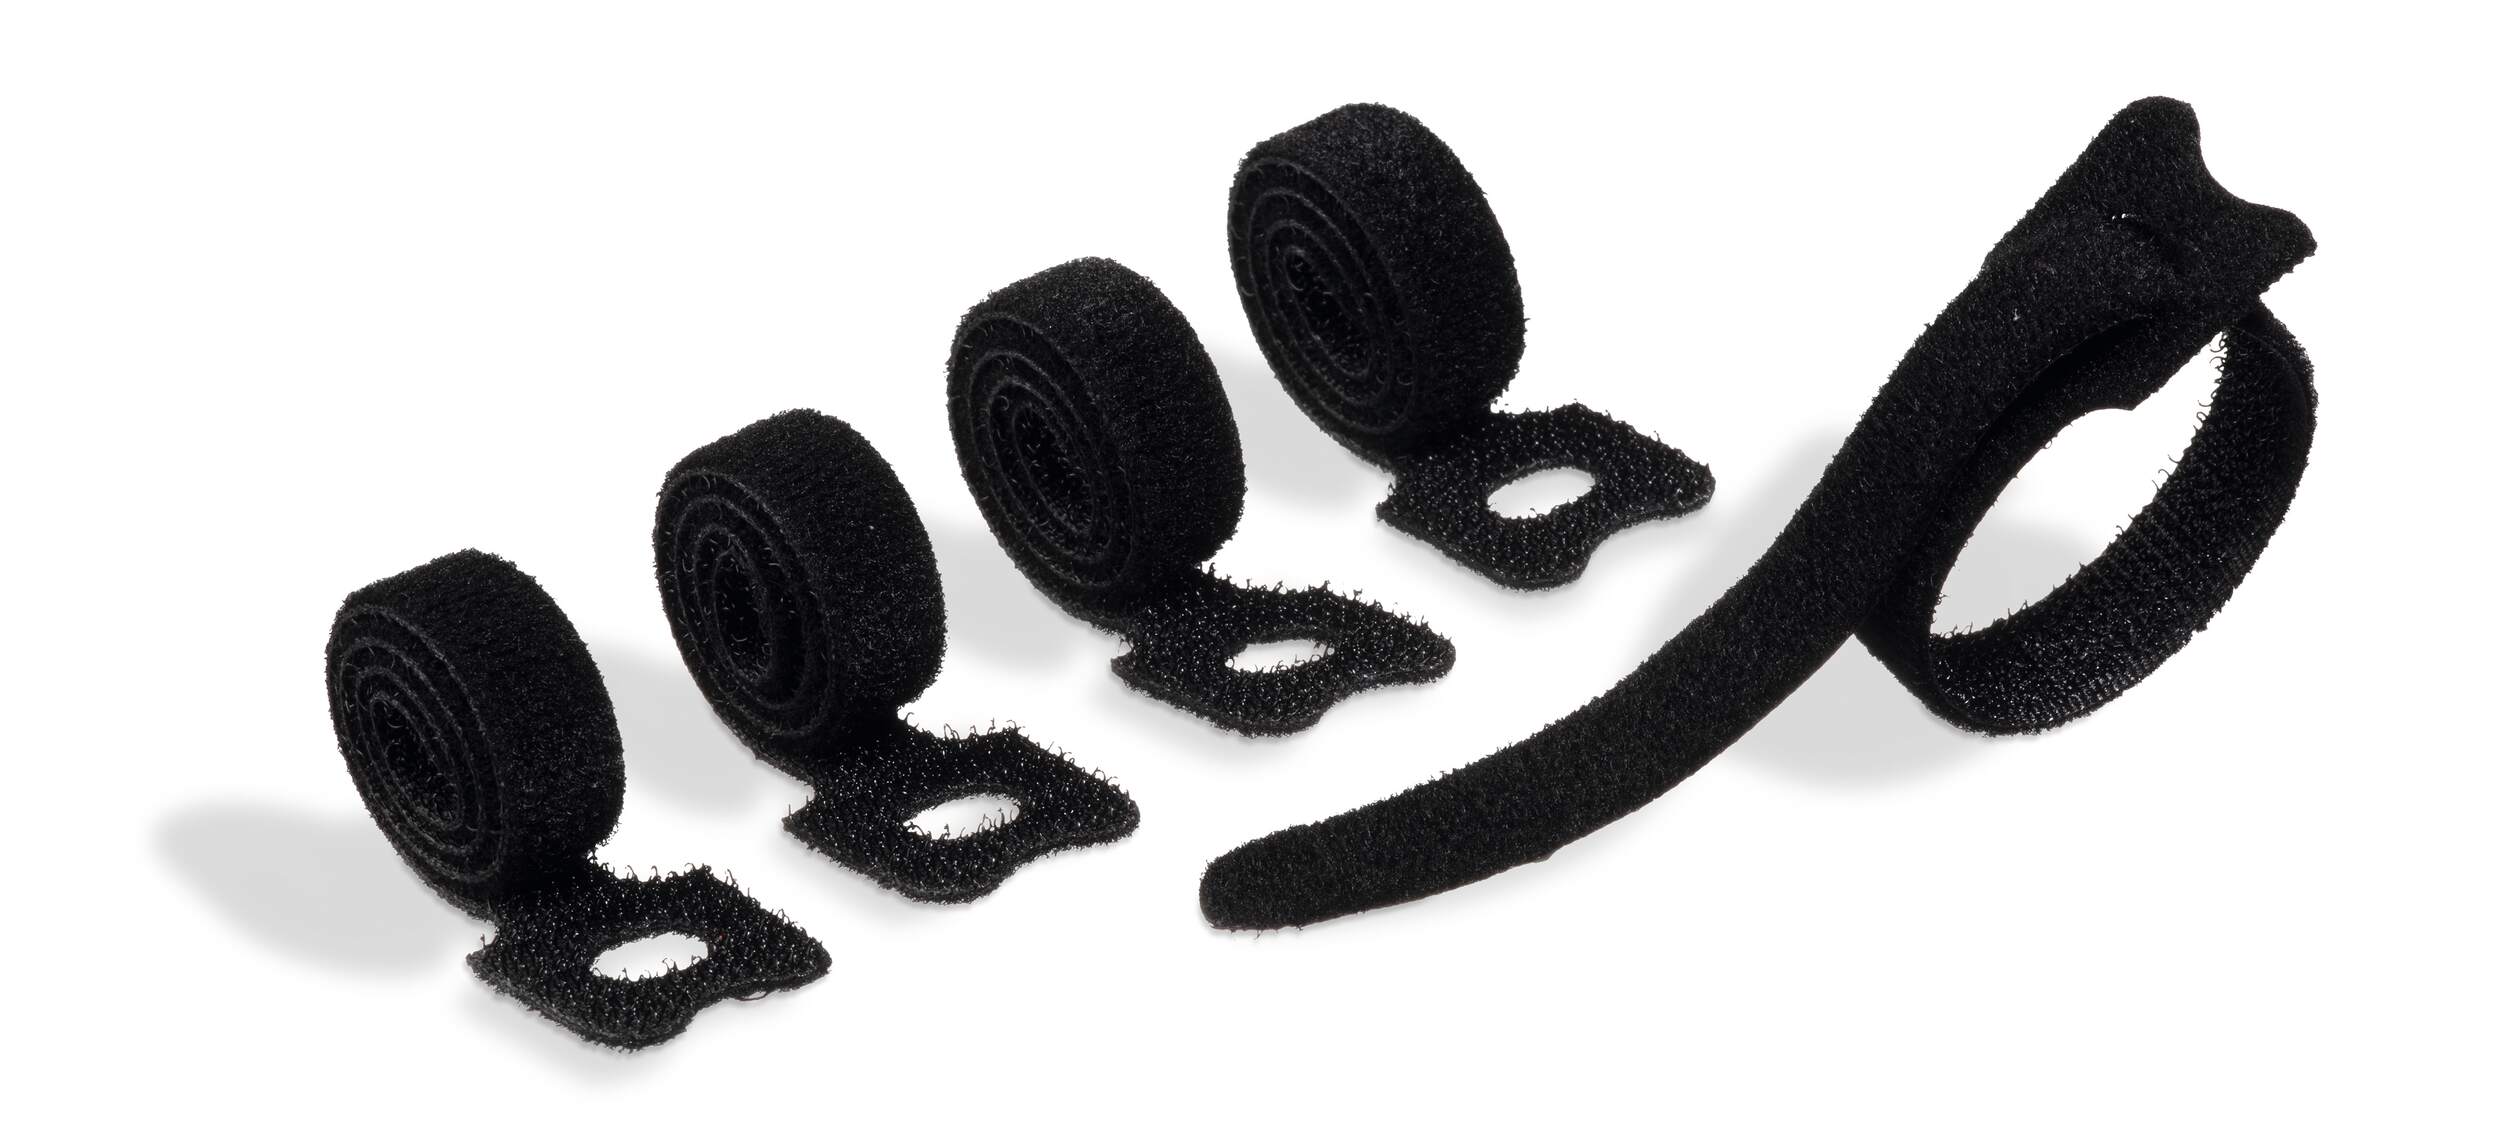 Durable CAVOLINE Reusable Hook and Loop Cable Tie Straps | 5 Pack | Black